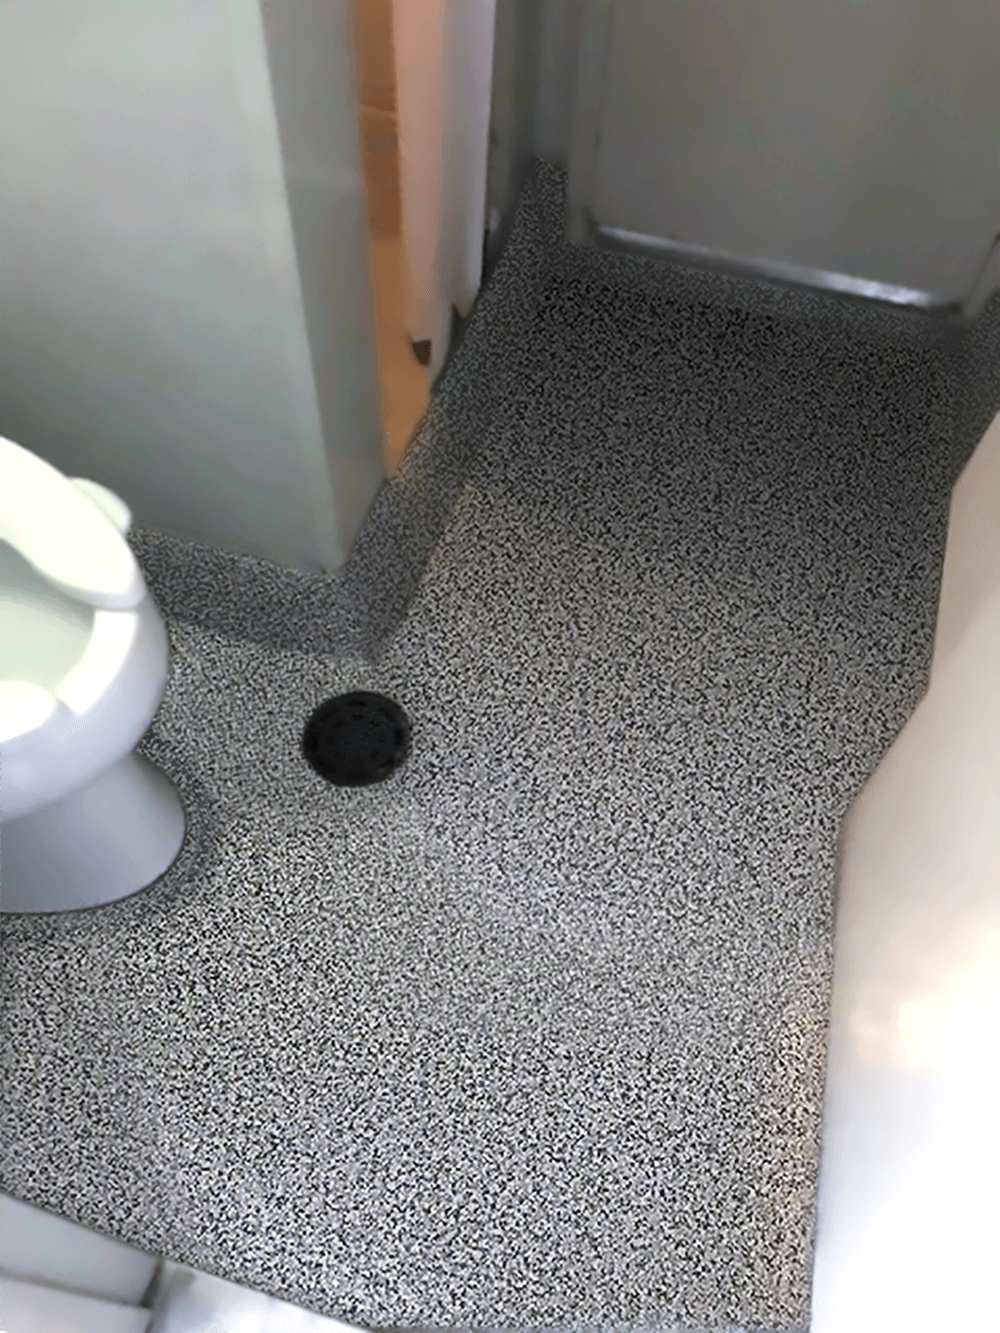 Image from Hygienic Flooring Case Study-Finished Head, Black and White Terrazzo Flooring